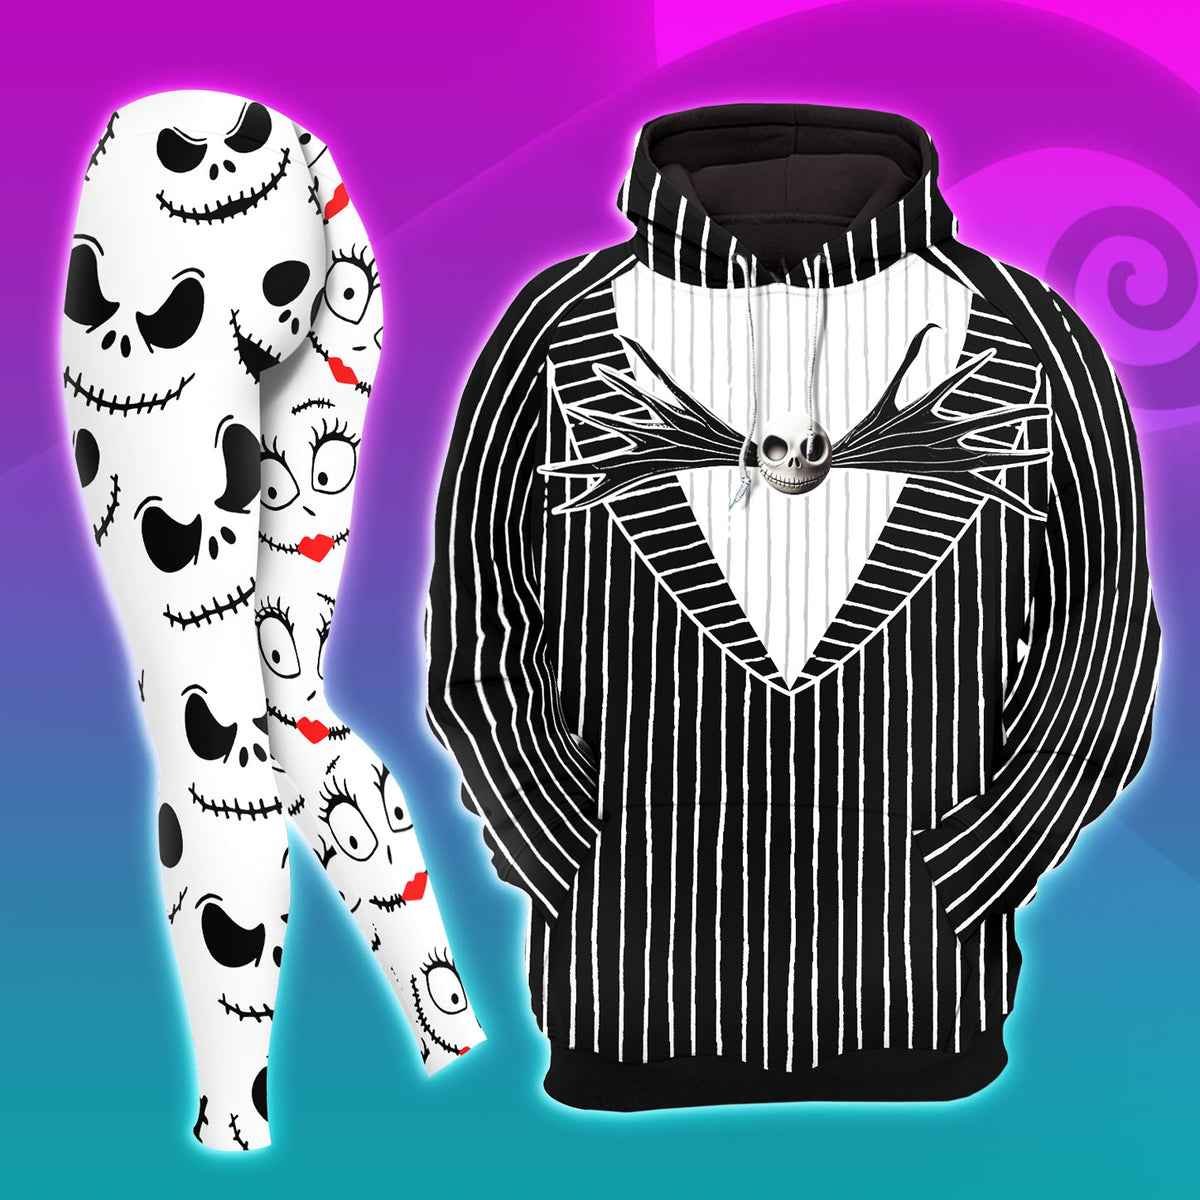 Lovely Couple Nightmare Theme Combo Hoodie and Leggings - Dark and edgy matching set with skull designs for a unique and stylish look.